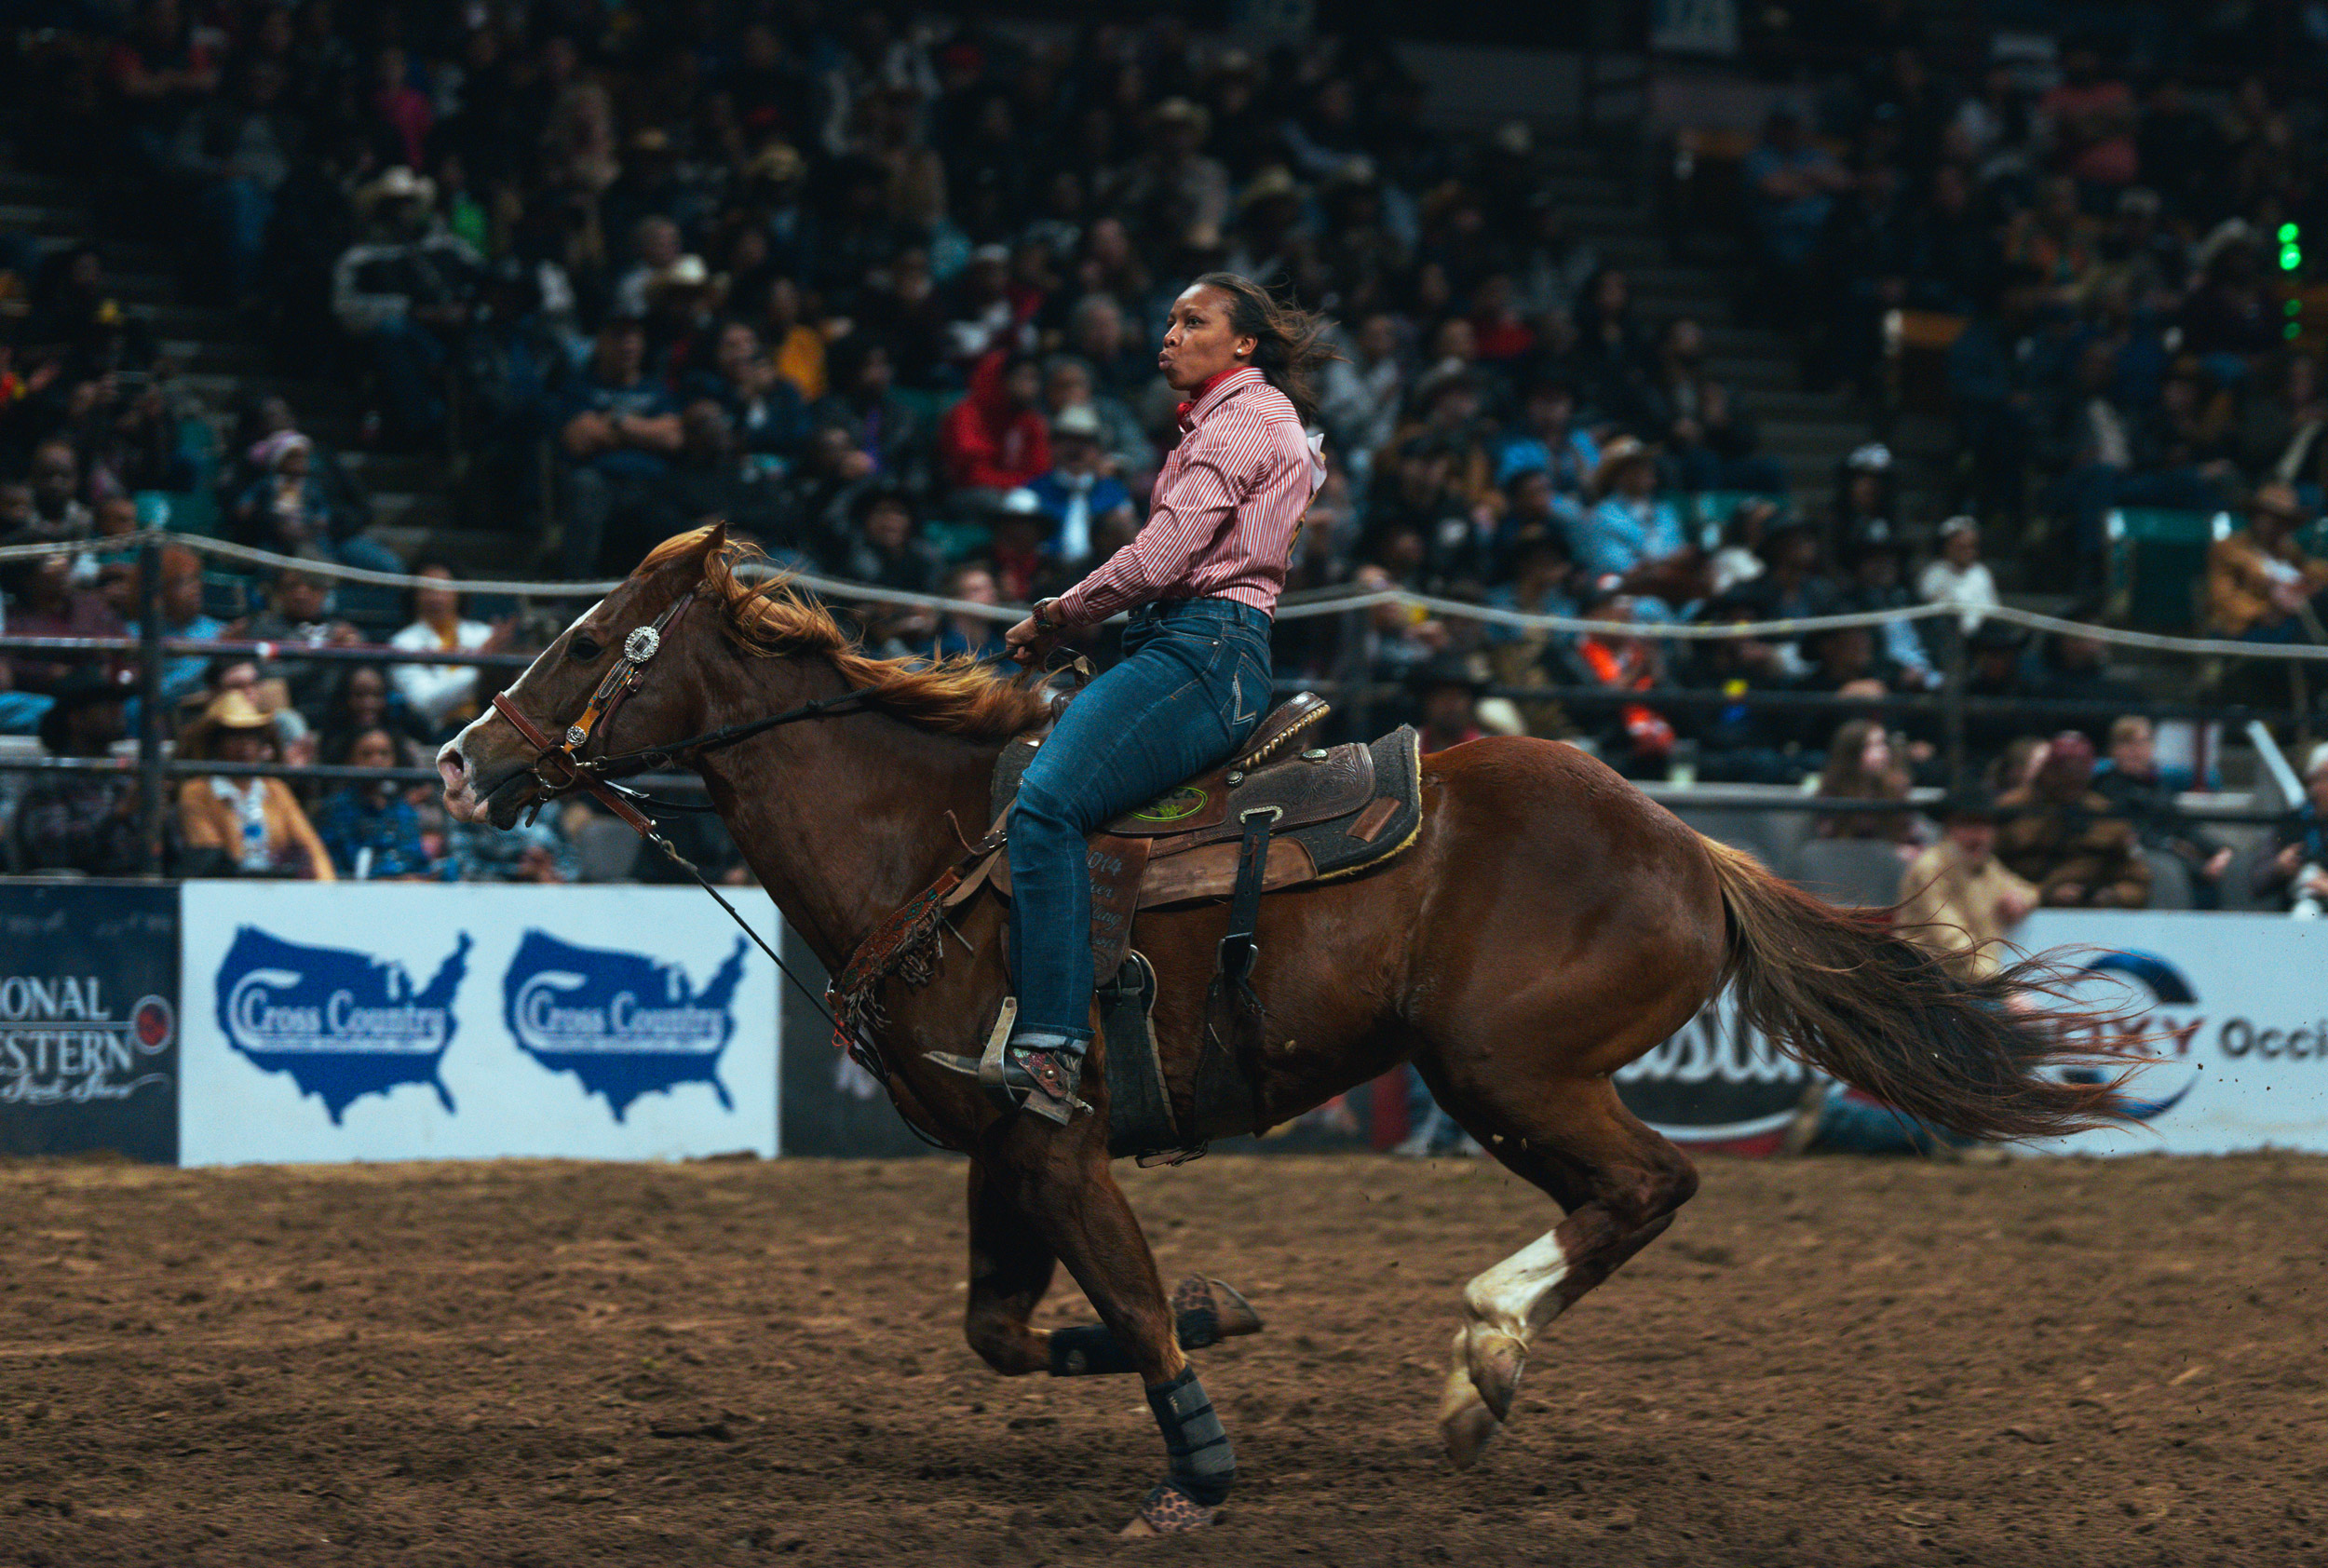 Woman riding horse rodeo at a competition